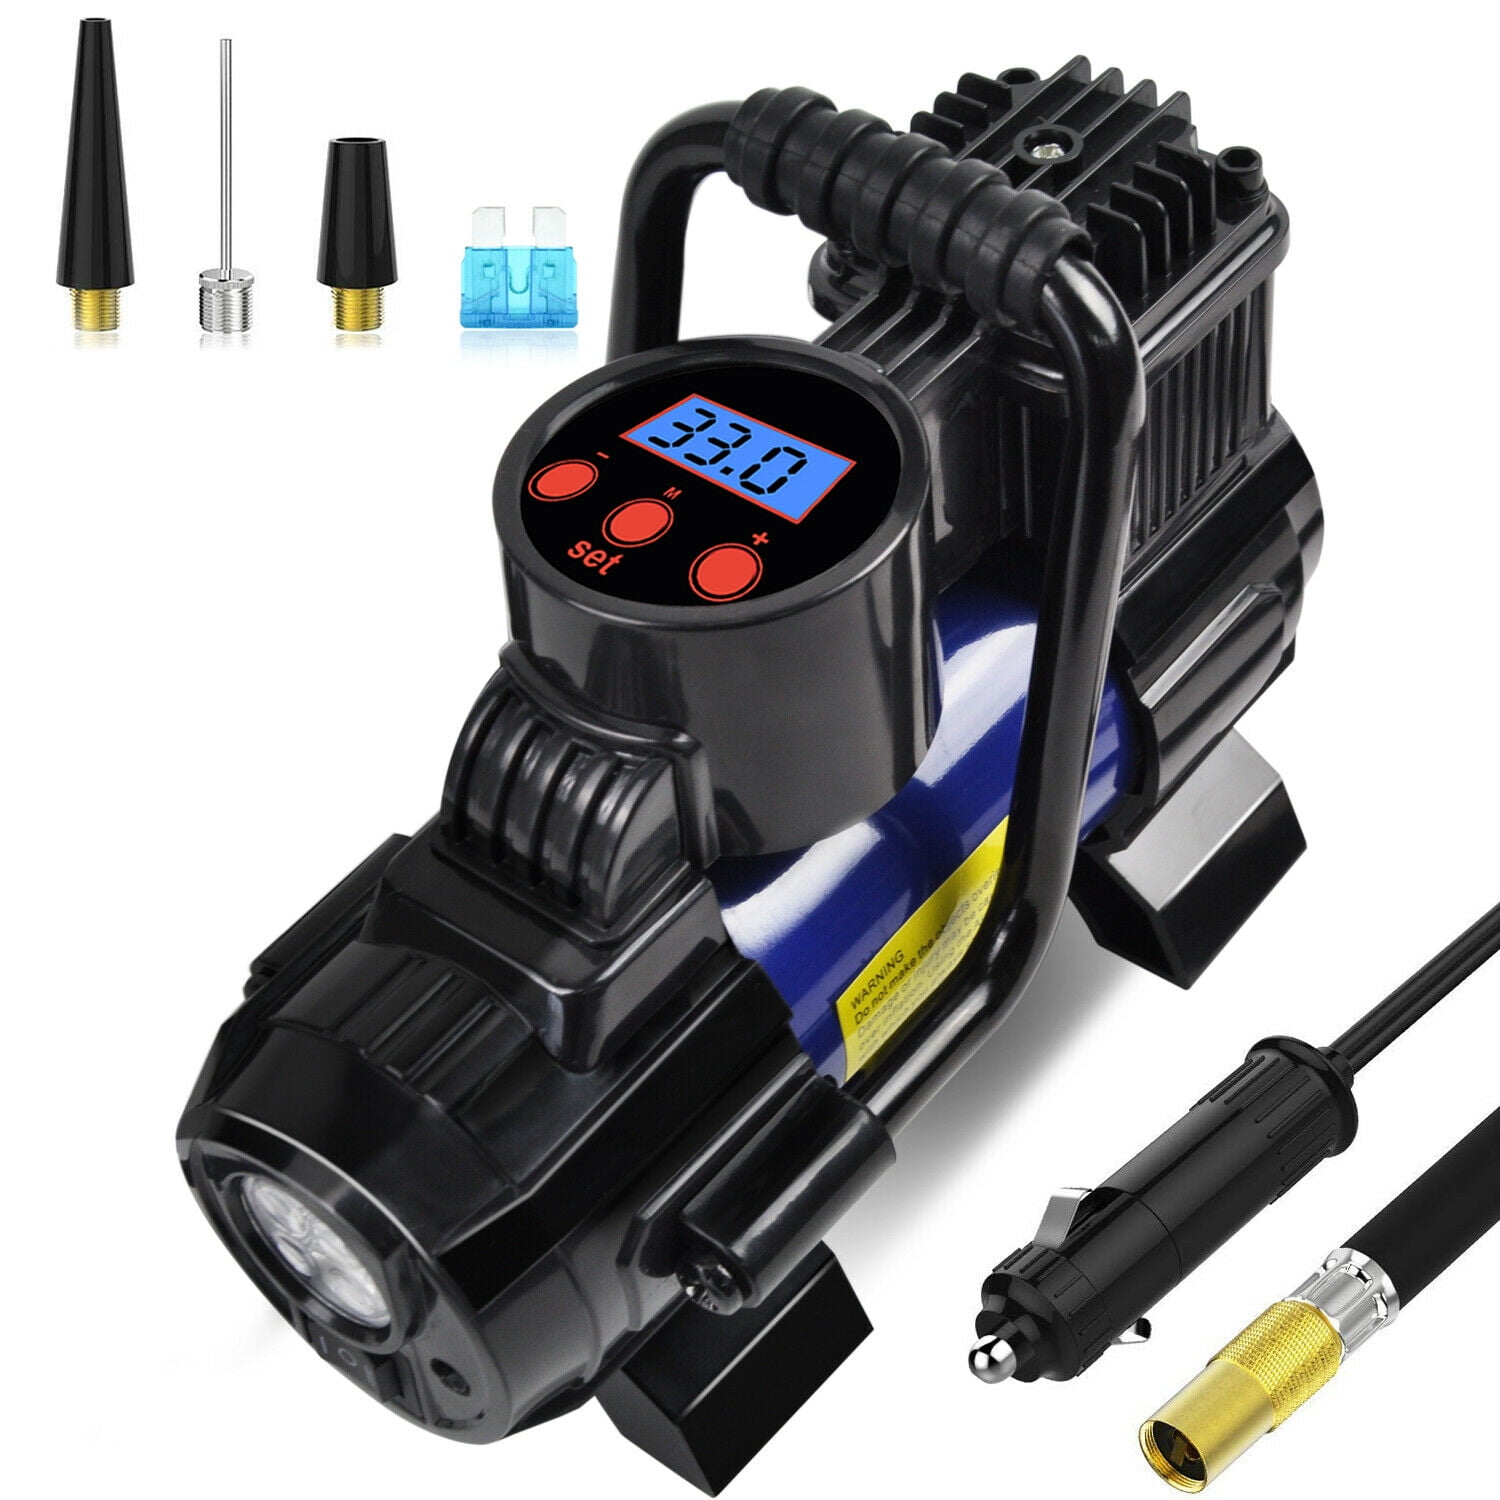 HEAVY DUTY PORTABLE 12V ELECTRIC TYRE INFLATOR 150PSI AIR COMPRESSOR PUMP 